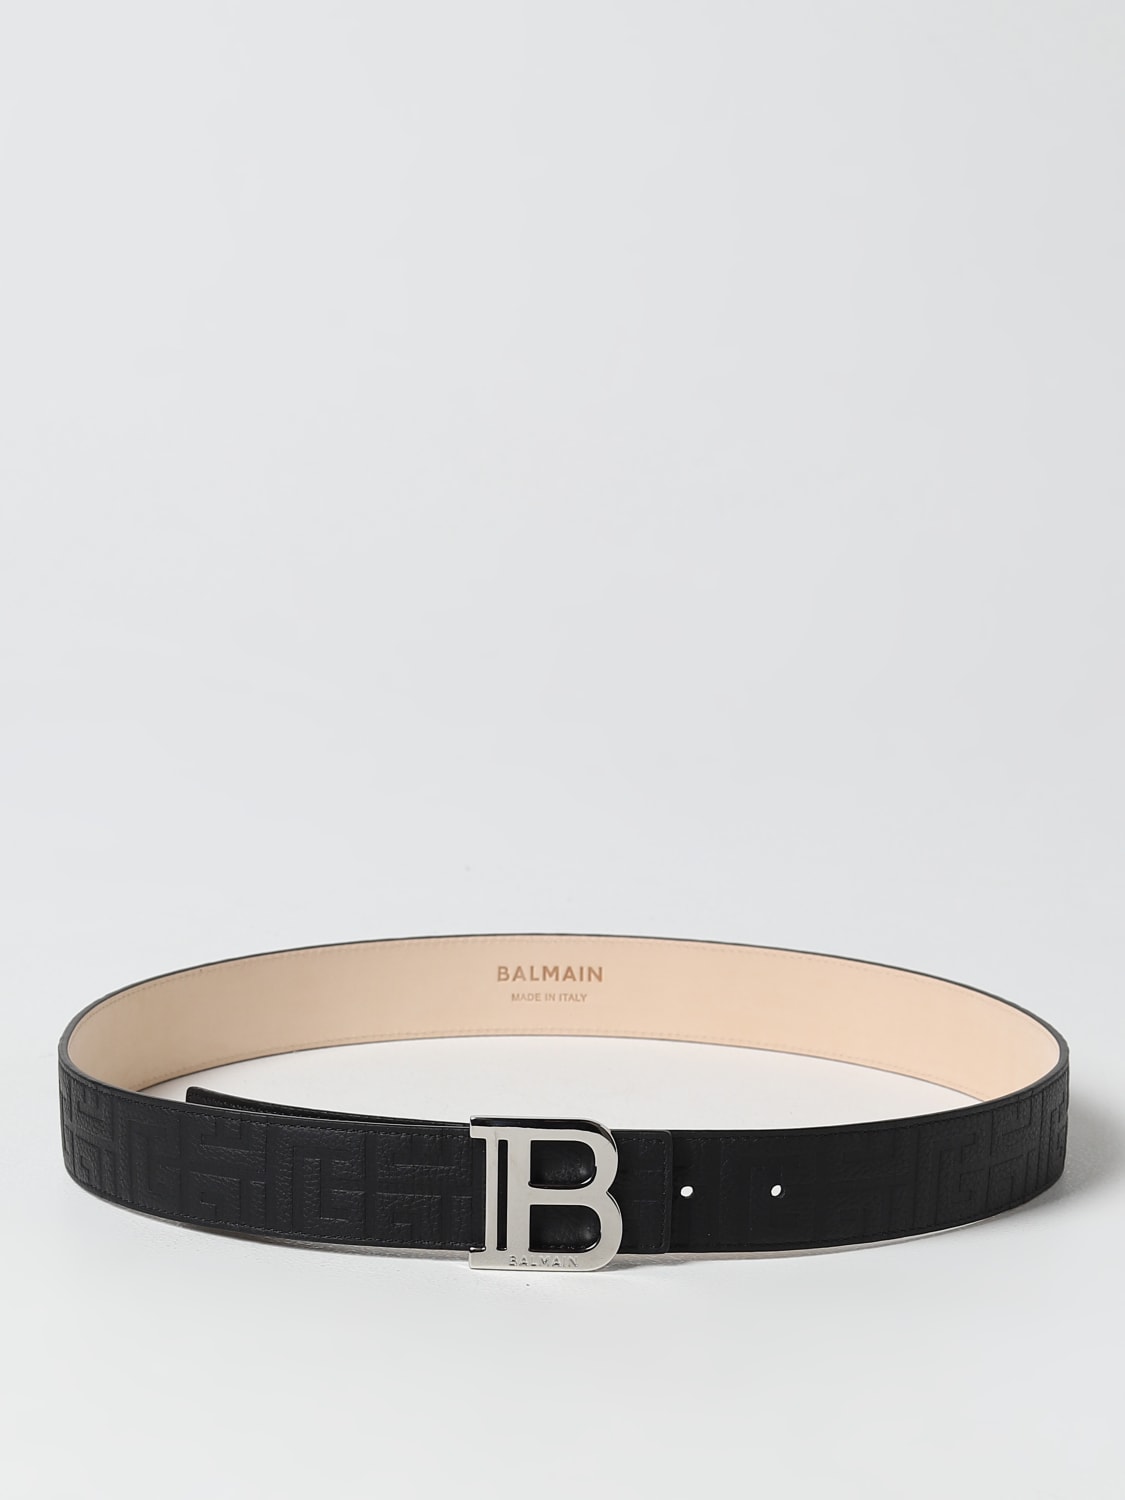 Balmain Belt in Grained Leather with All-Over Embossed Monogram